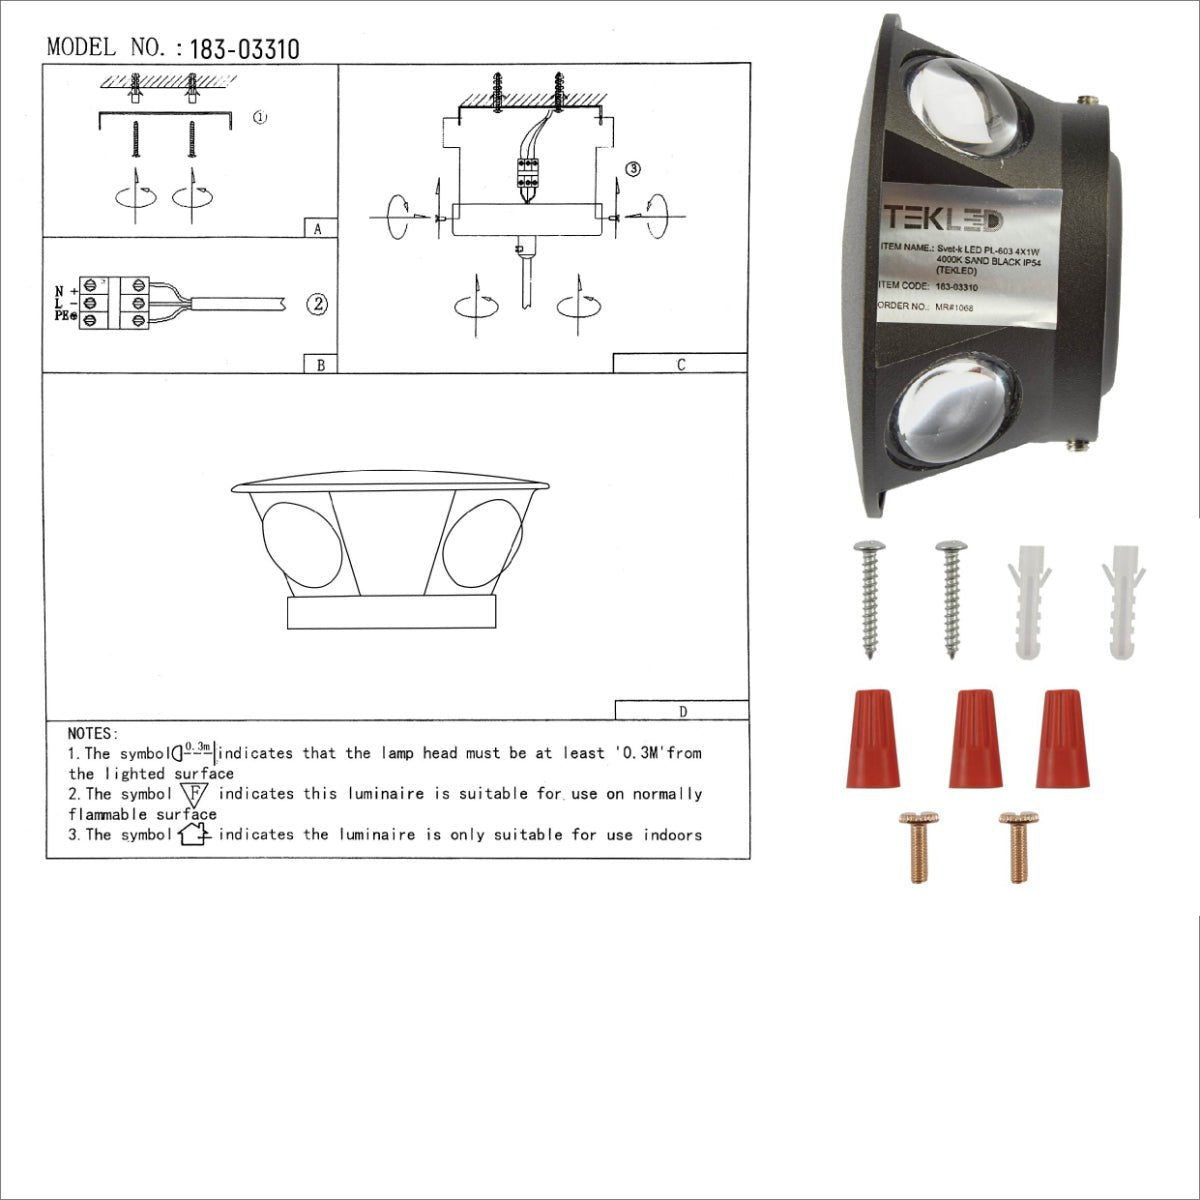 User manual for Black Compass 4 Way Outdoor Modern LED Wall Light | TEKLED 183-03310